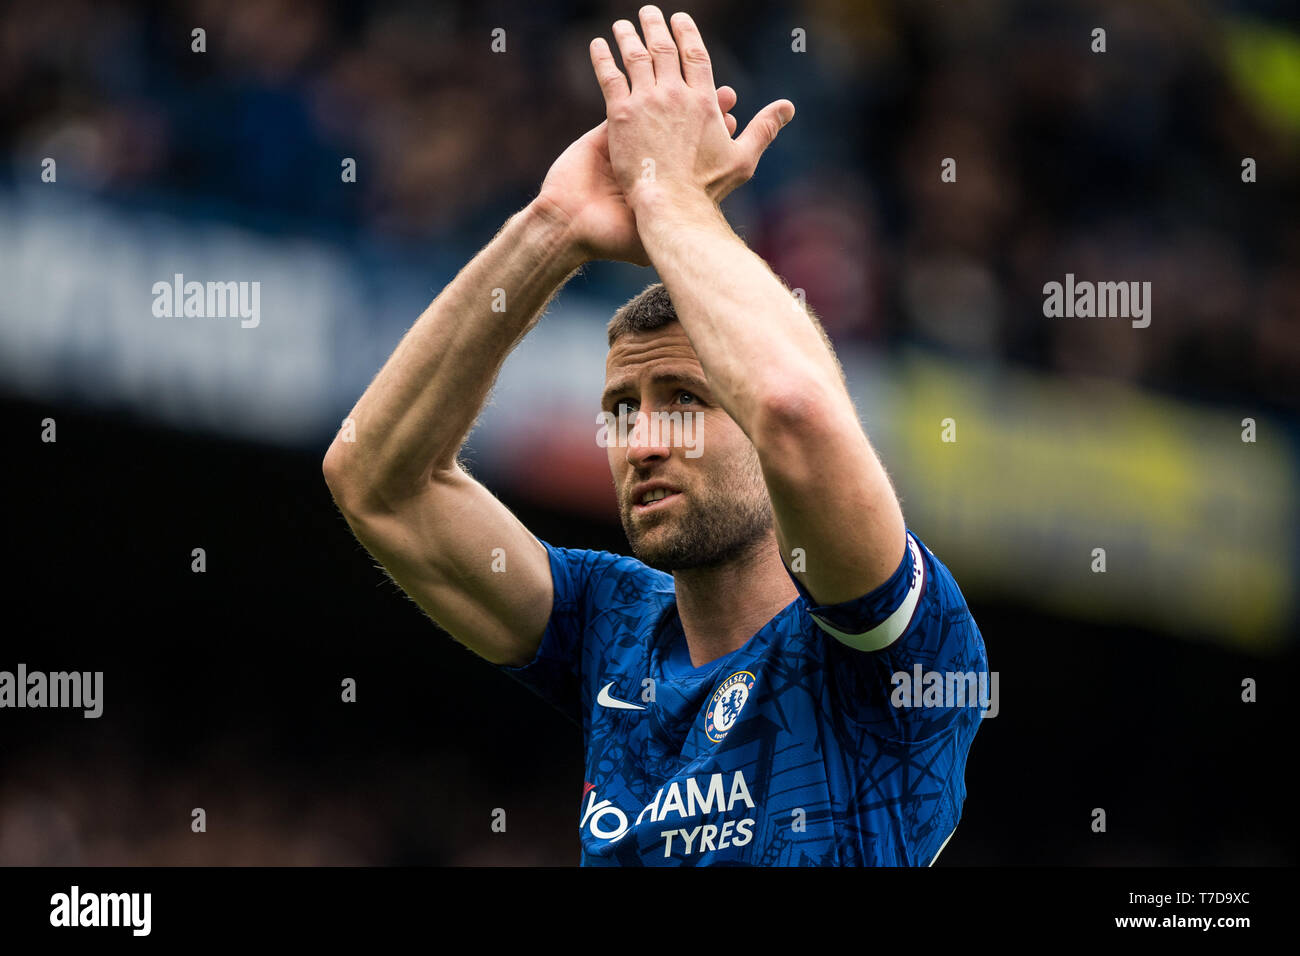 LONDON, ENGLAND - MAY 05: Gary Cahill of Chelsea FC during the Premier League match between Chelsea FC and Watford FC at Stamford Bridge on May 5, 2019 in London, United Kingdom. (Photo by Sebastian Frej/MB Media) Stock Photo